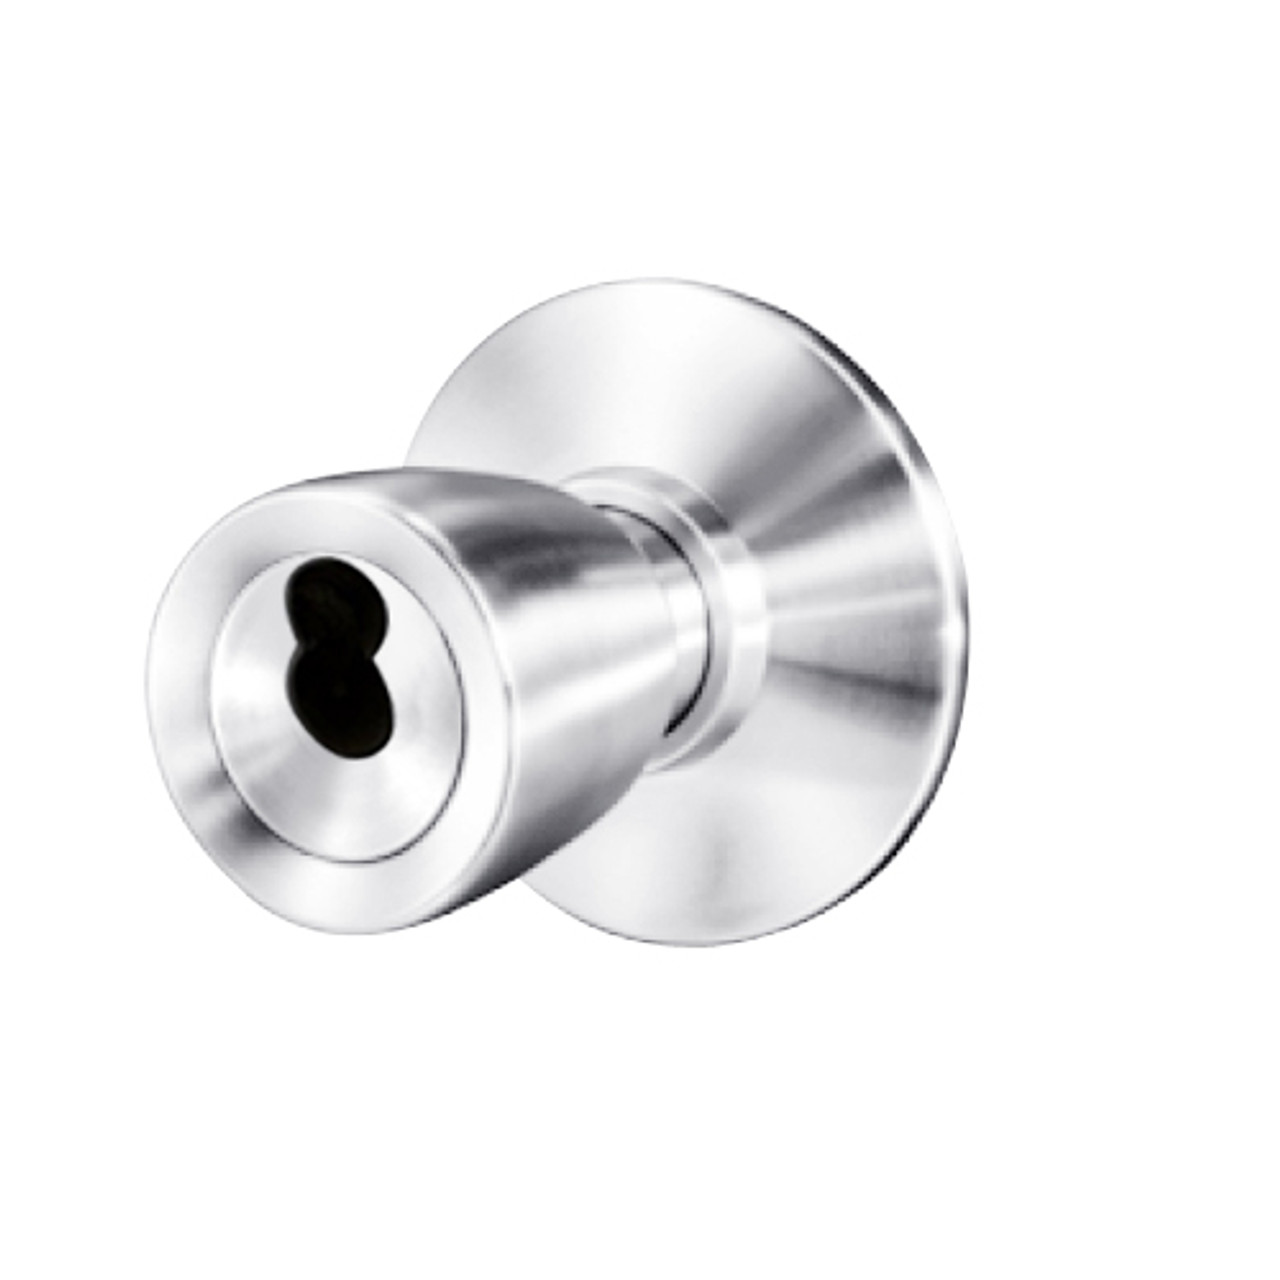 8K47YD6DSTK625 Best 8K Series Exit Heavy Duty Cylindrical Knob Locks with Tulip Style in Bright Chrome